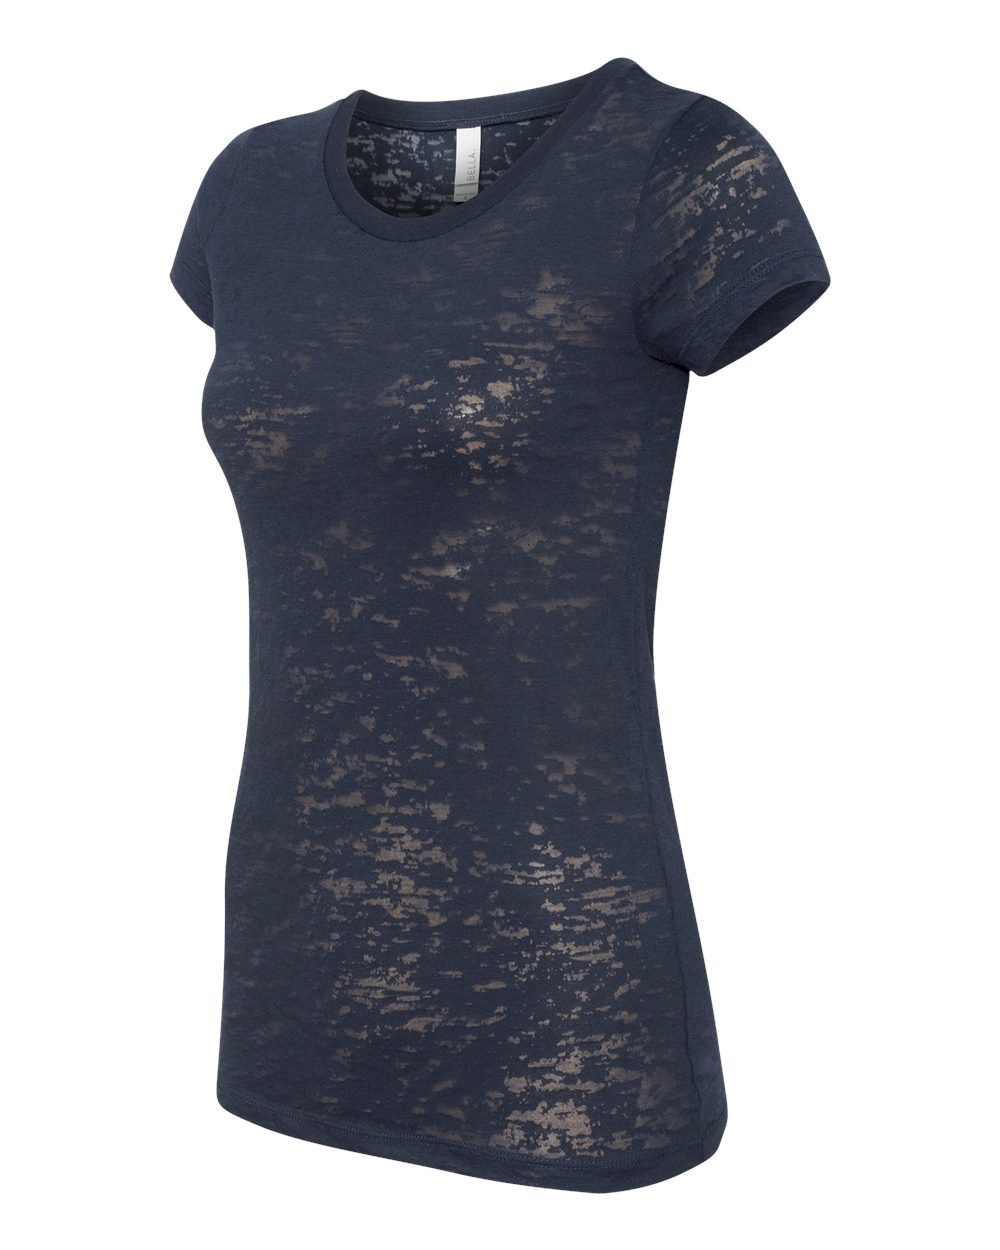 Bella + Canvas Ladies' Burnout T-Shirt Embroidery Blanks - NAVY